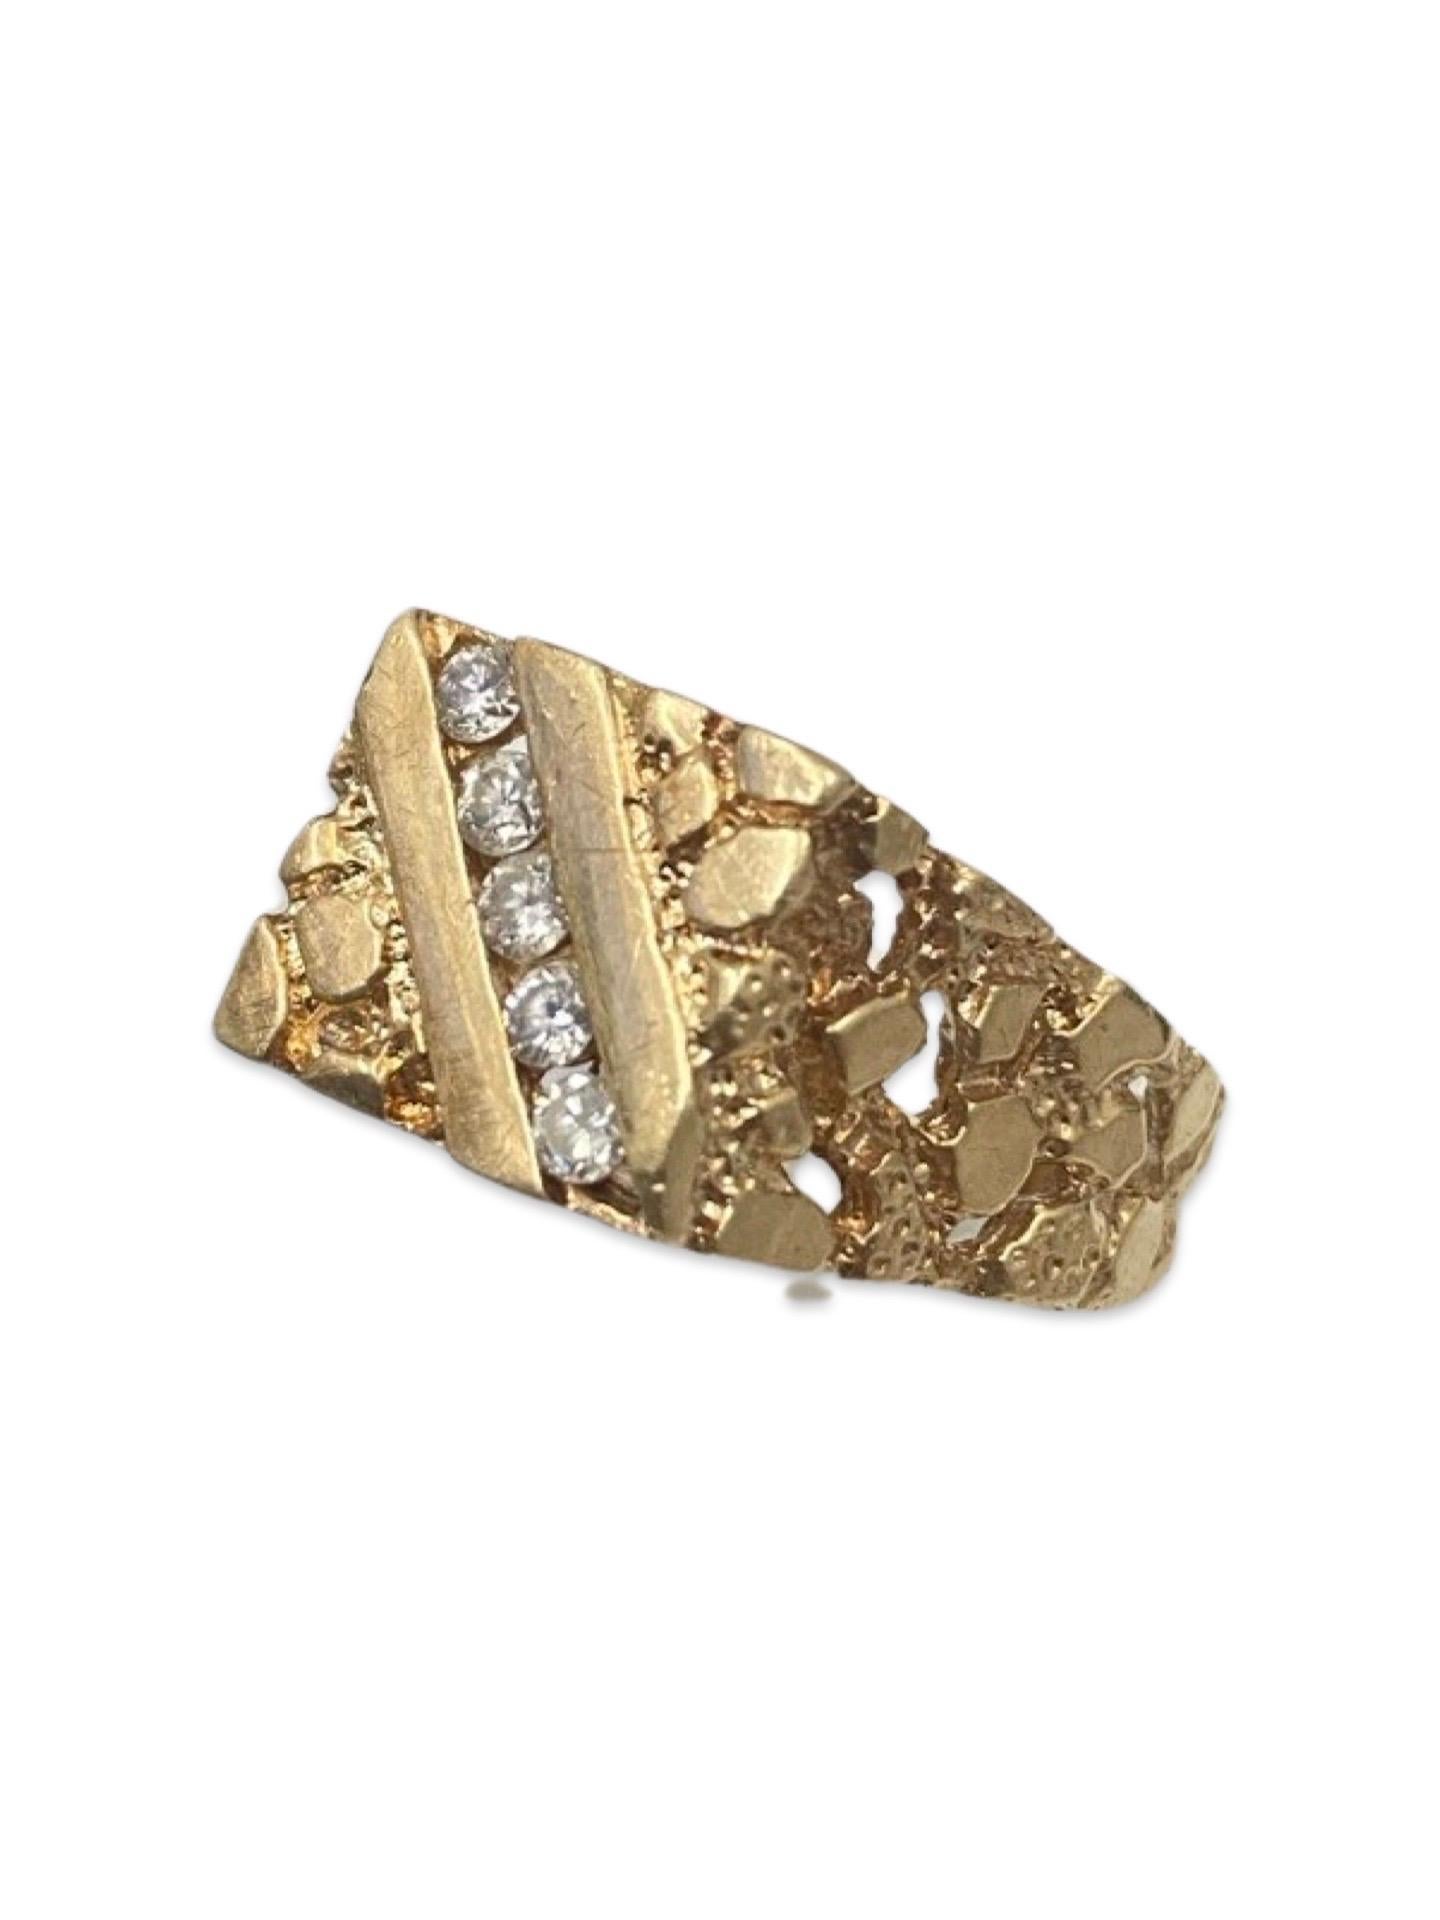 Vintage 0.40 Carat Diamonds Nugget Design Ring 14k Gold. The ring measures 12mm in height and features 5 round diamonds high quality each weights approximately 0.08 ct for a total of 0.40tcw. The ring is a true iconic look if the 1980s. The ring is